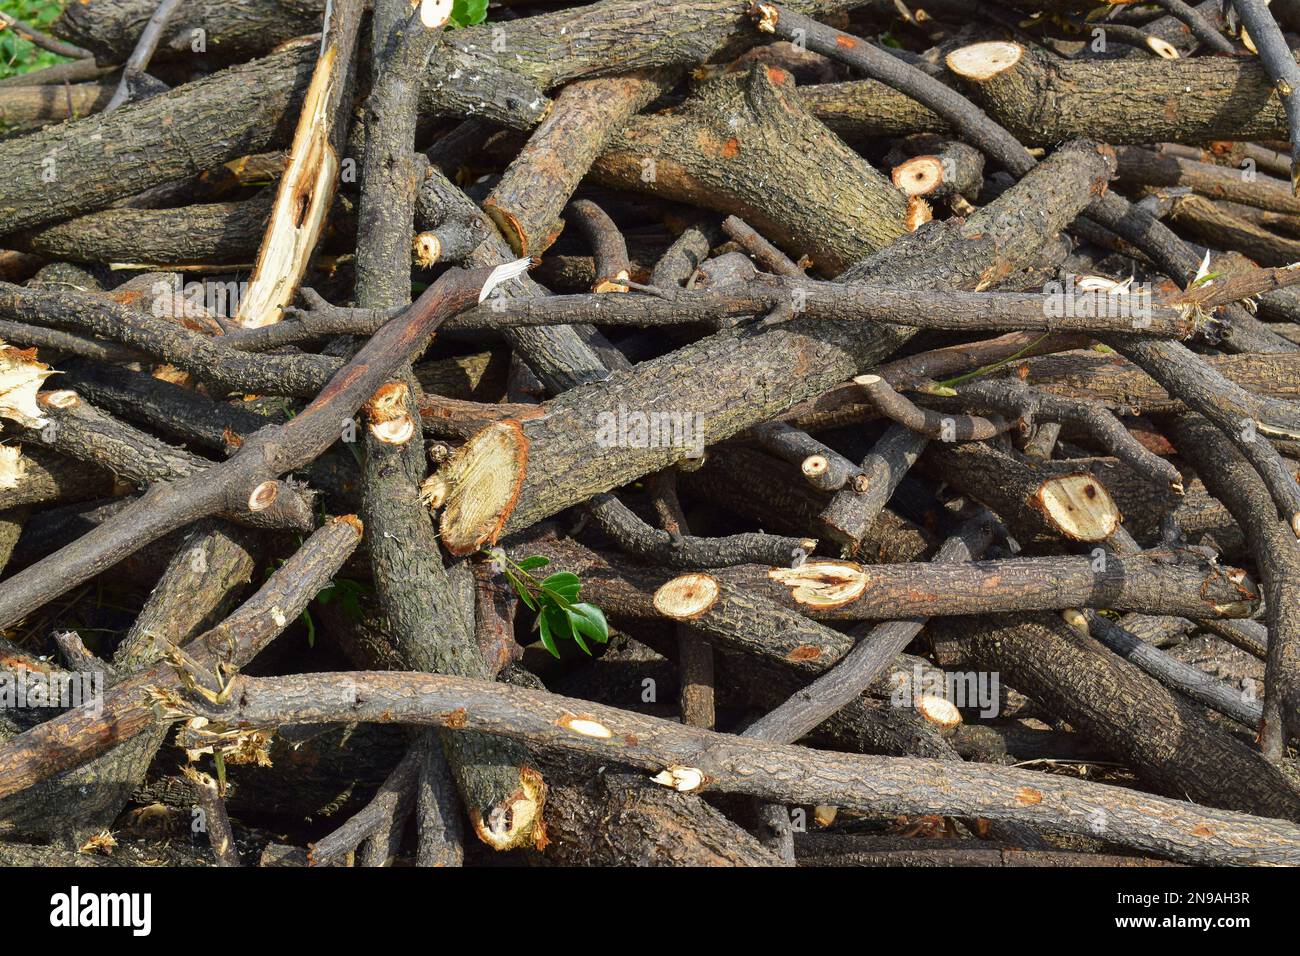 Pile of tree branch, wood stick photo, Stock image